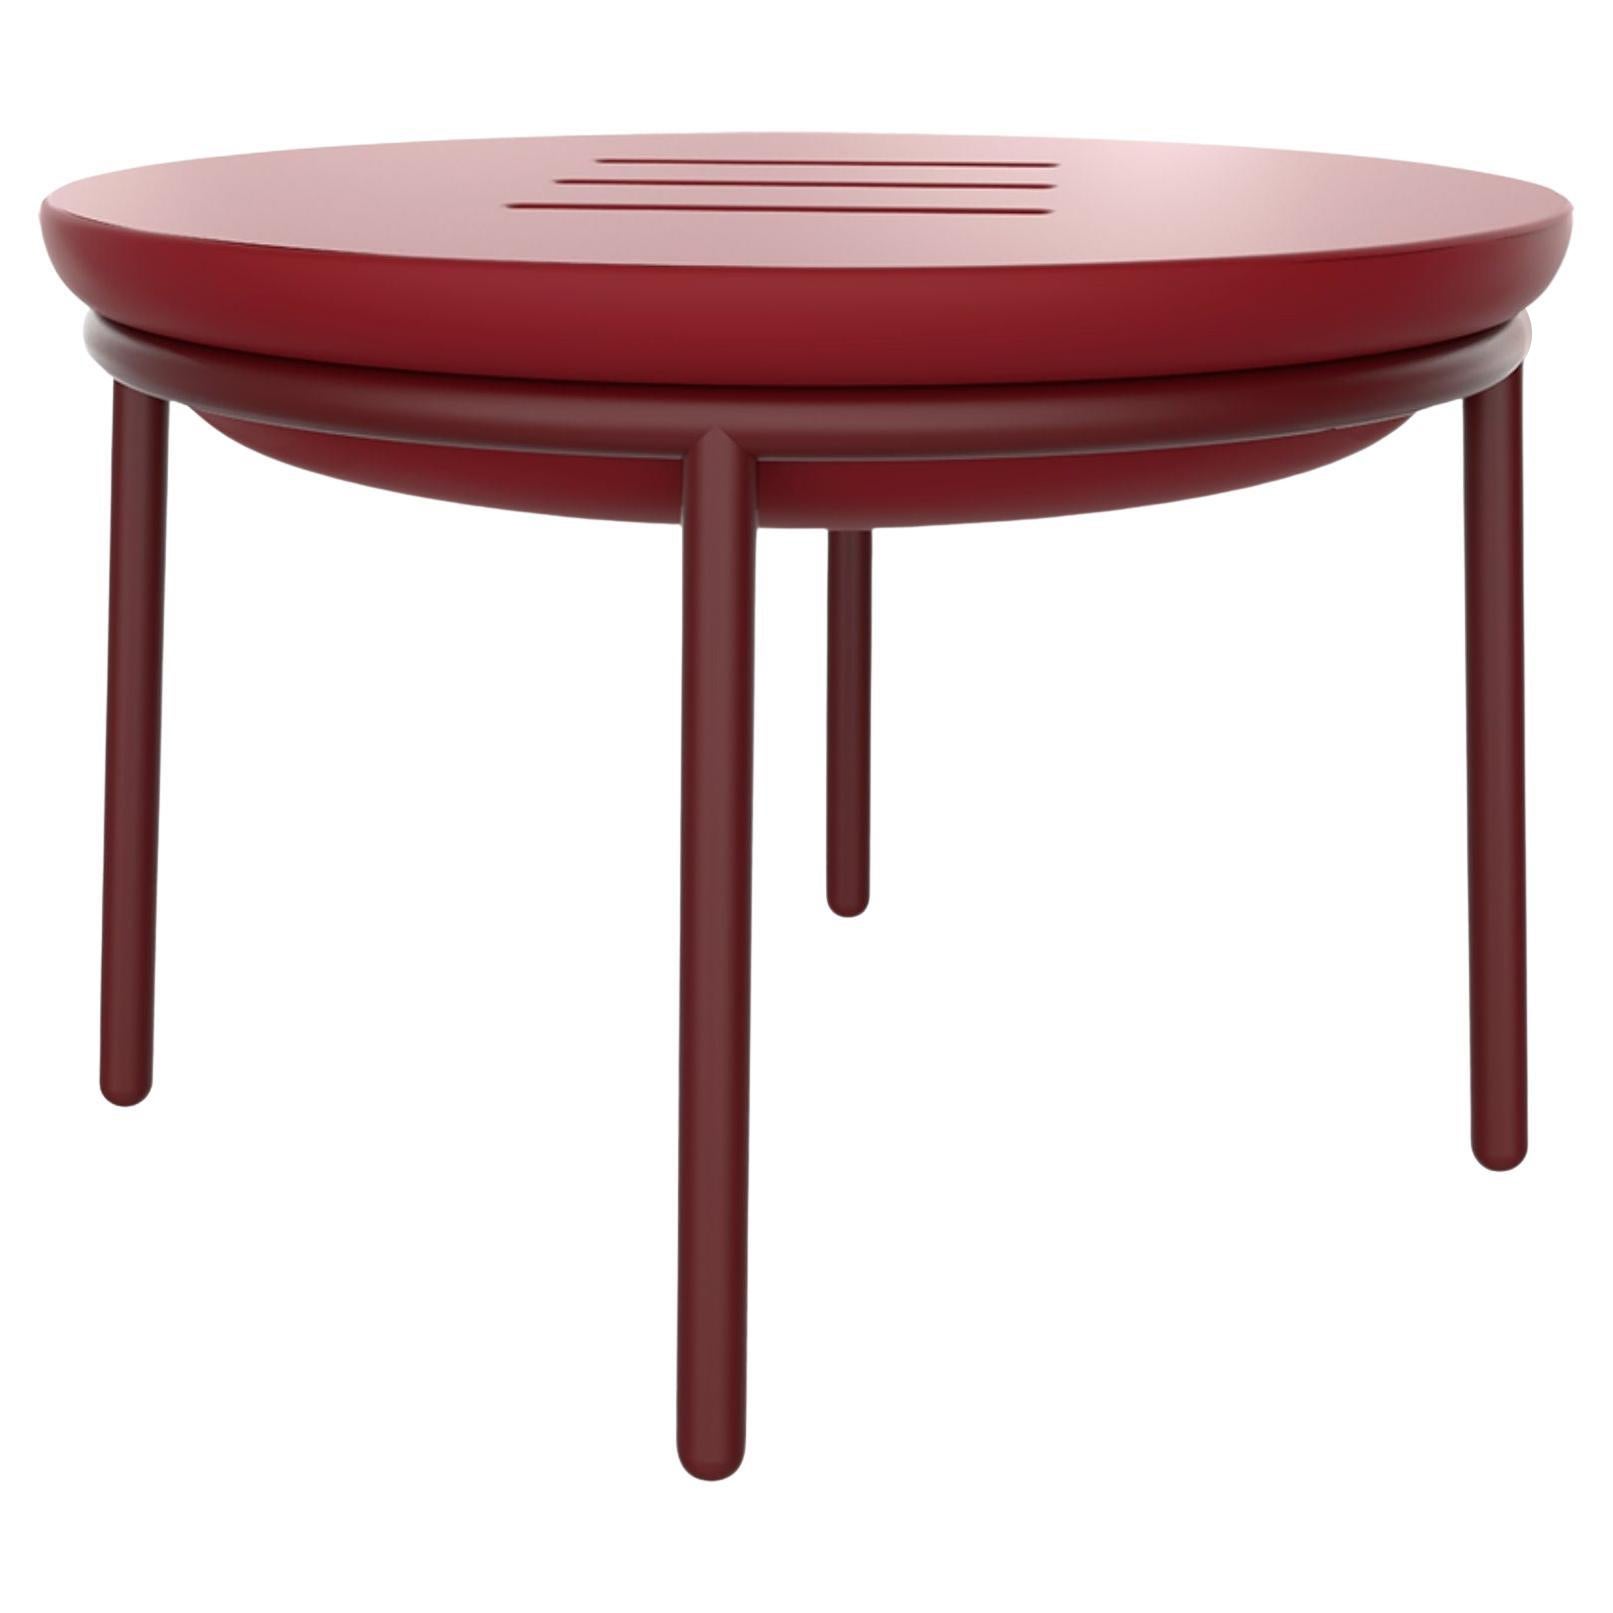 Lace Burgundy 60 Low Table by Mowee For Sale